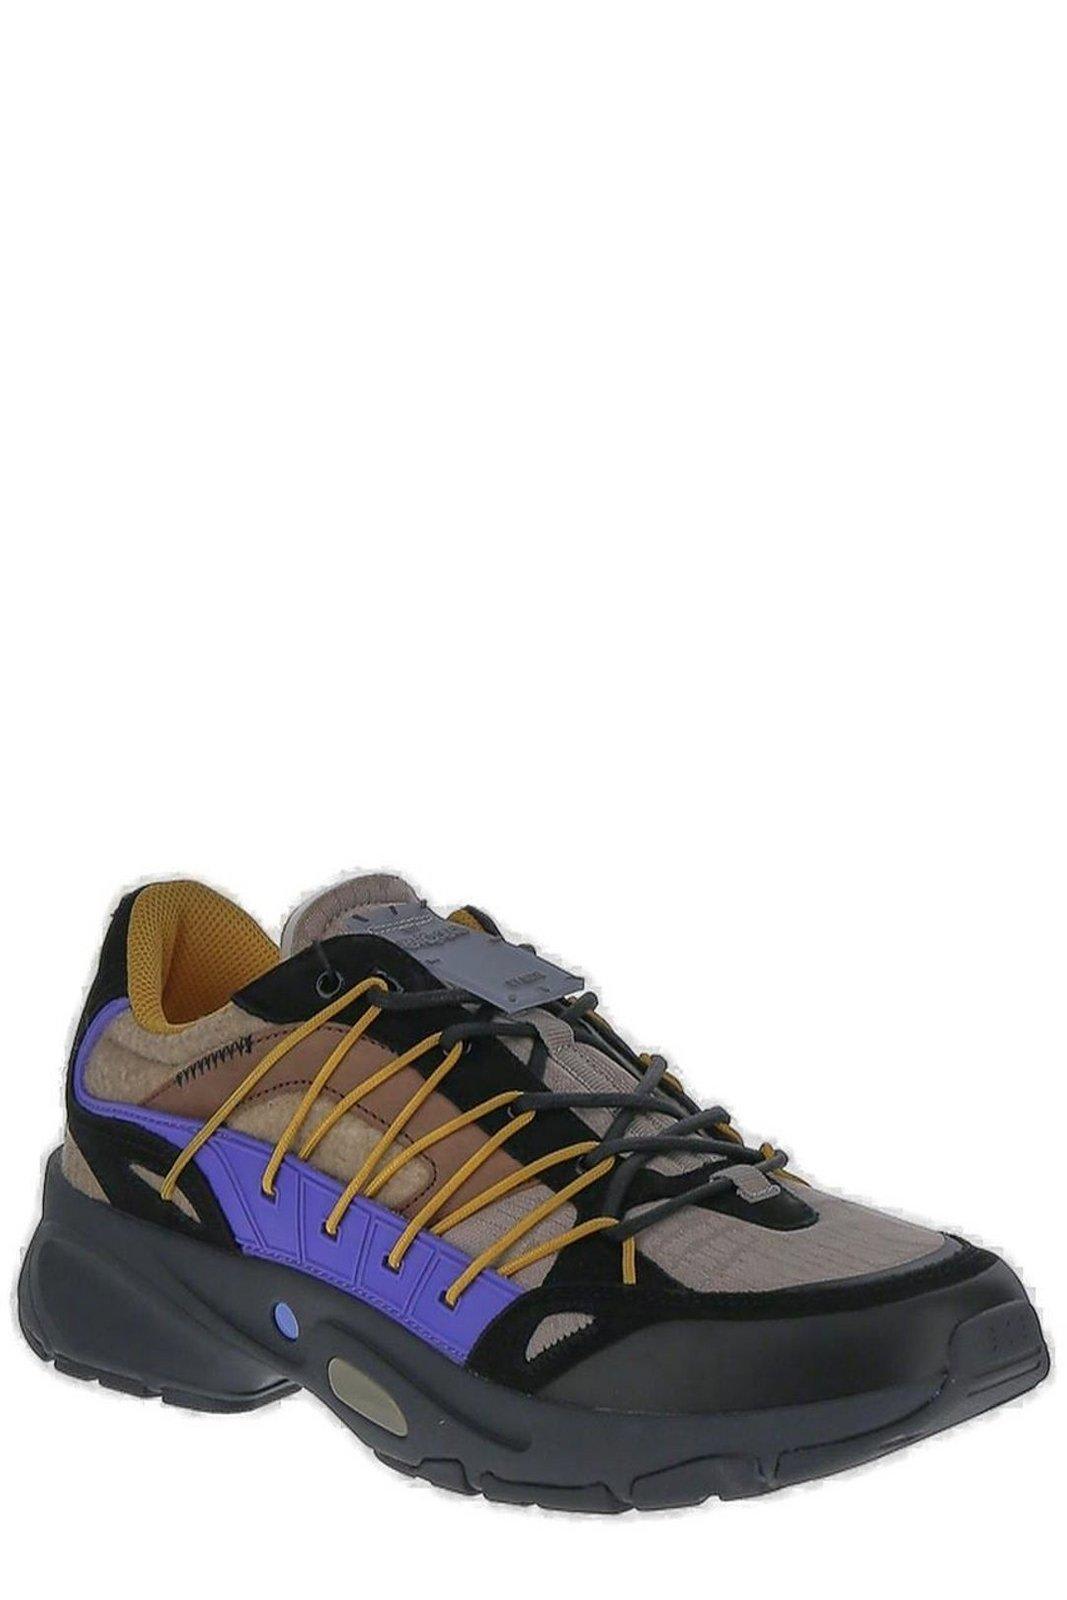 Shop Mcq By Alexander Mcqueen B12 Aratana 1.3 Lace-up Sneakers In Multiple Colors